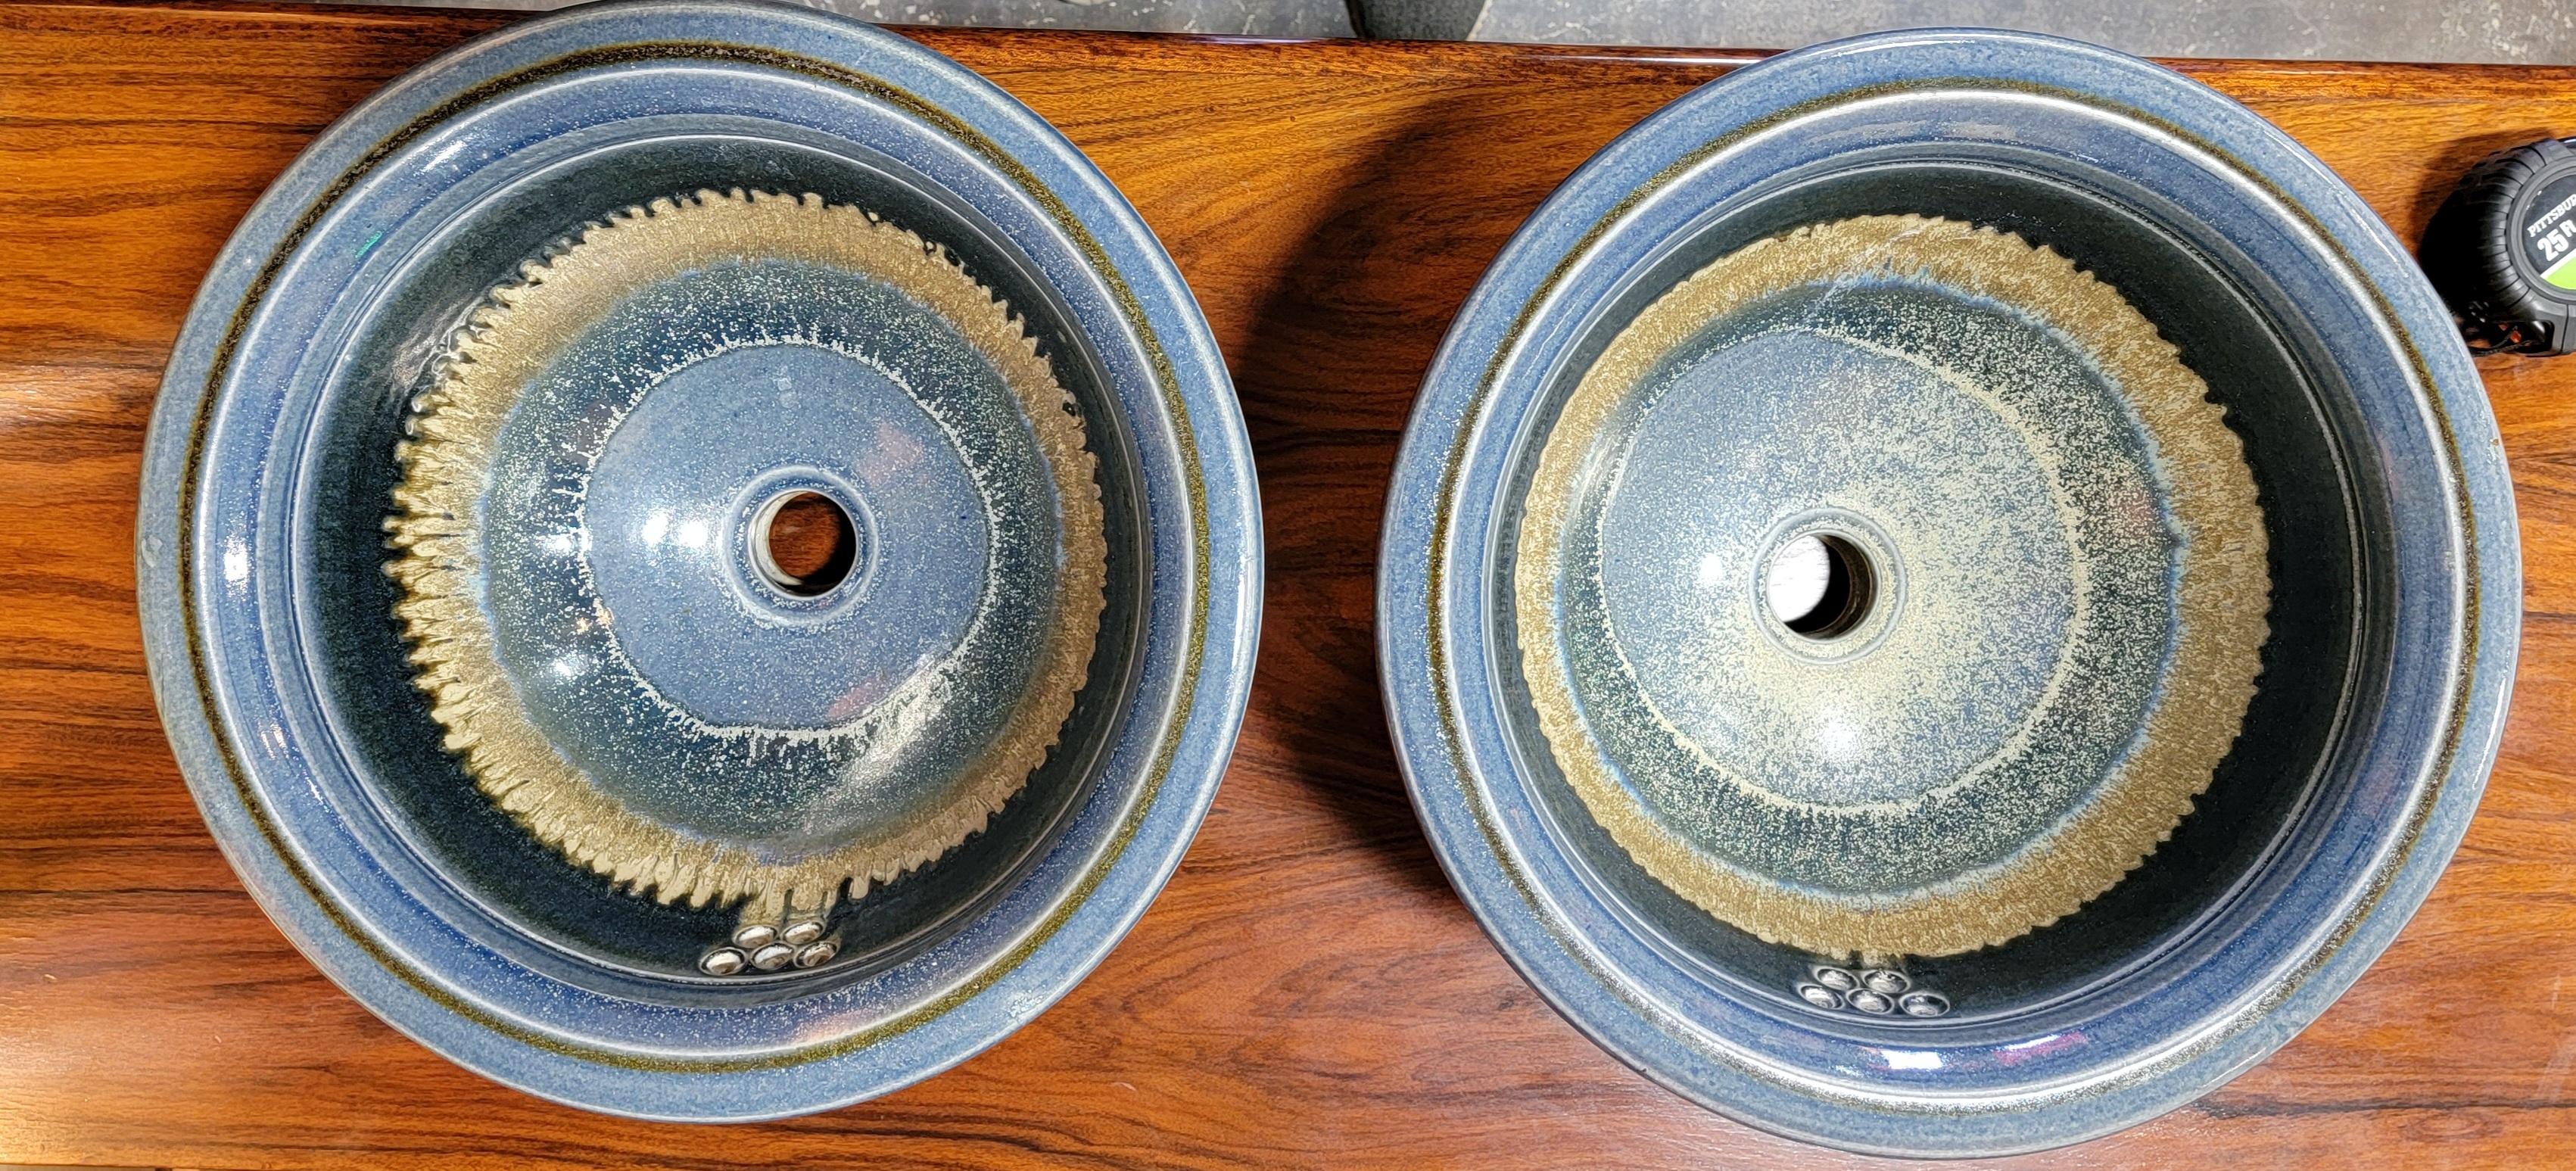 A mid-Century Modern / Scandinavian Modern ceramic sinks. 1970's. Glazed in variations of blue with drippy glaze detail. Incised with signature at base. 